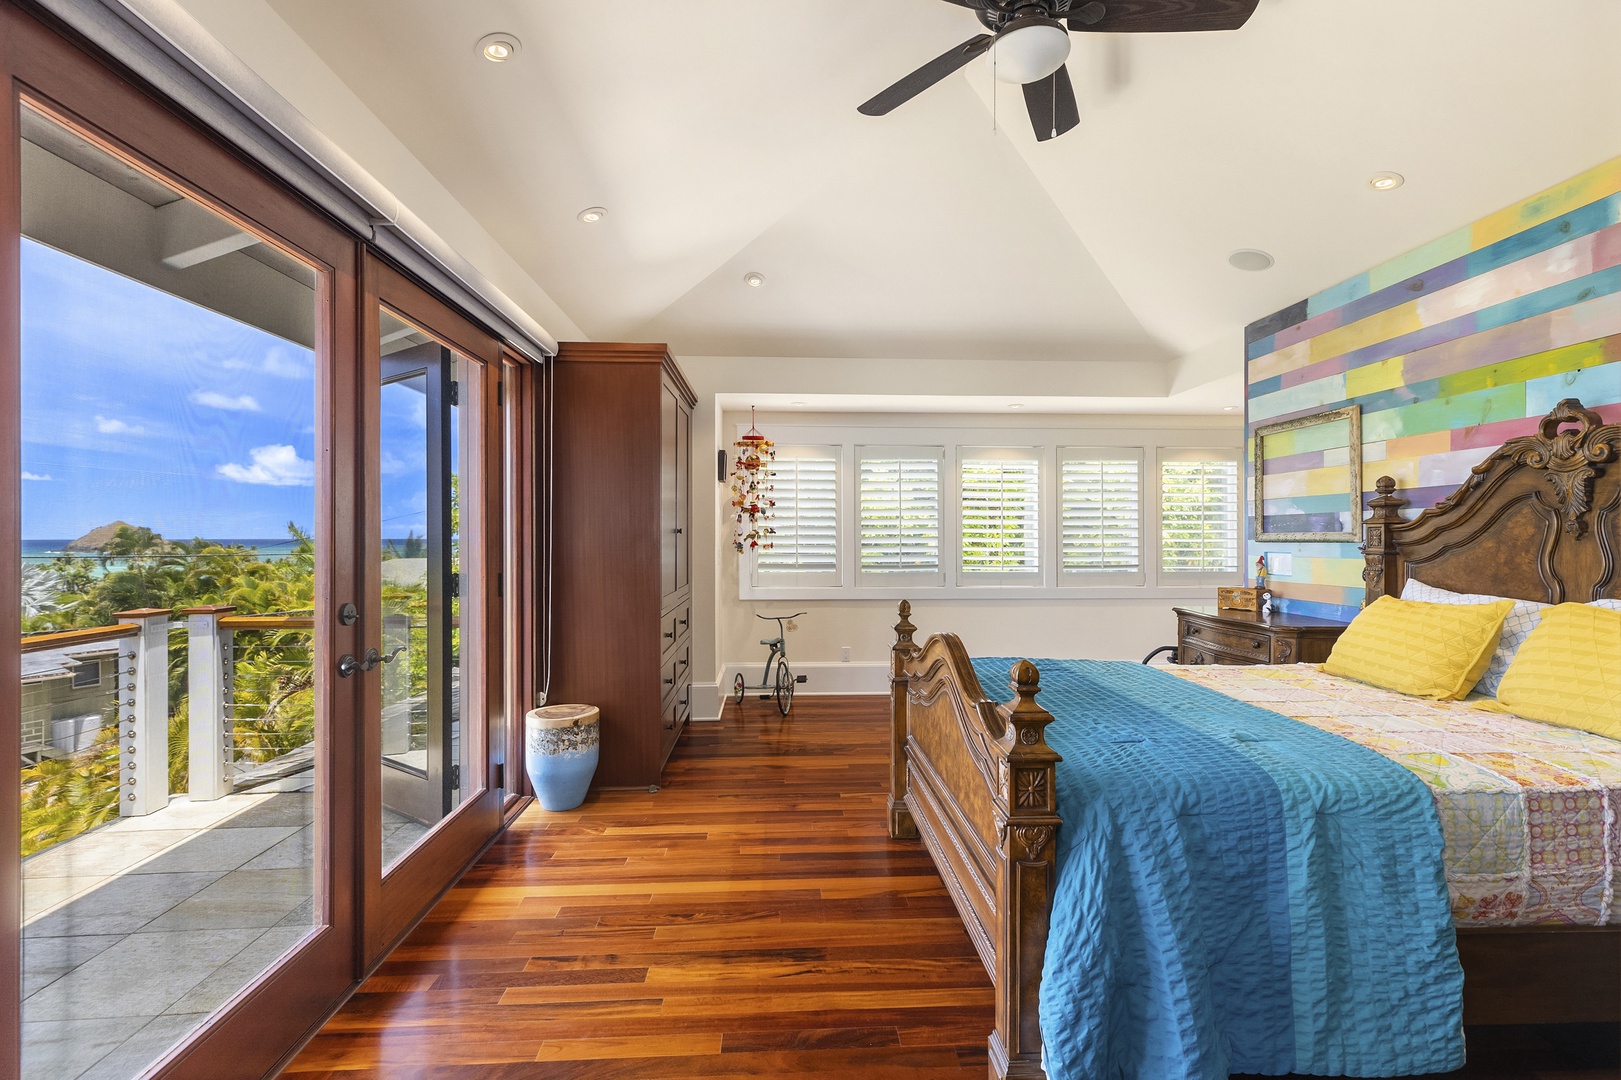 Kailua Vacation Rentals, Lanikai Villa** - Guest Bedroom 2 is furnished with a king bed, ocean views, split A/C, ceiling fan, and ensuite bath.